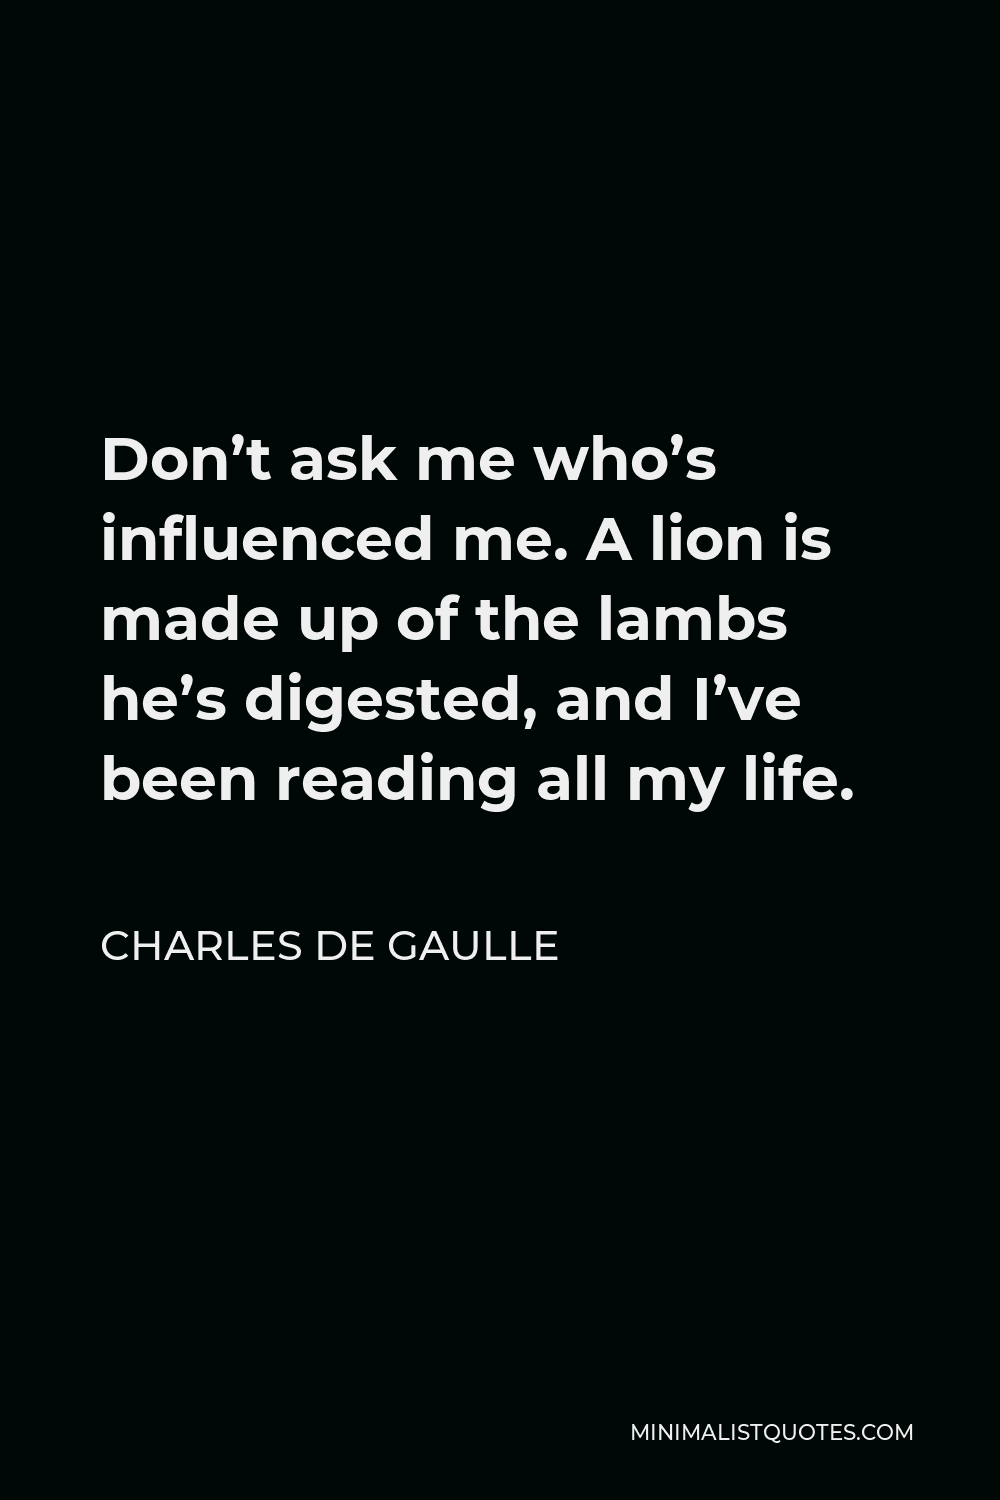 Charles de Gaulle Quote - Don’t ask me who’s influenced me. A lion is made up of the lambs he’s digested, and I’ve been reading all my life.